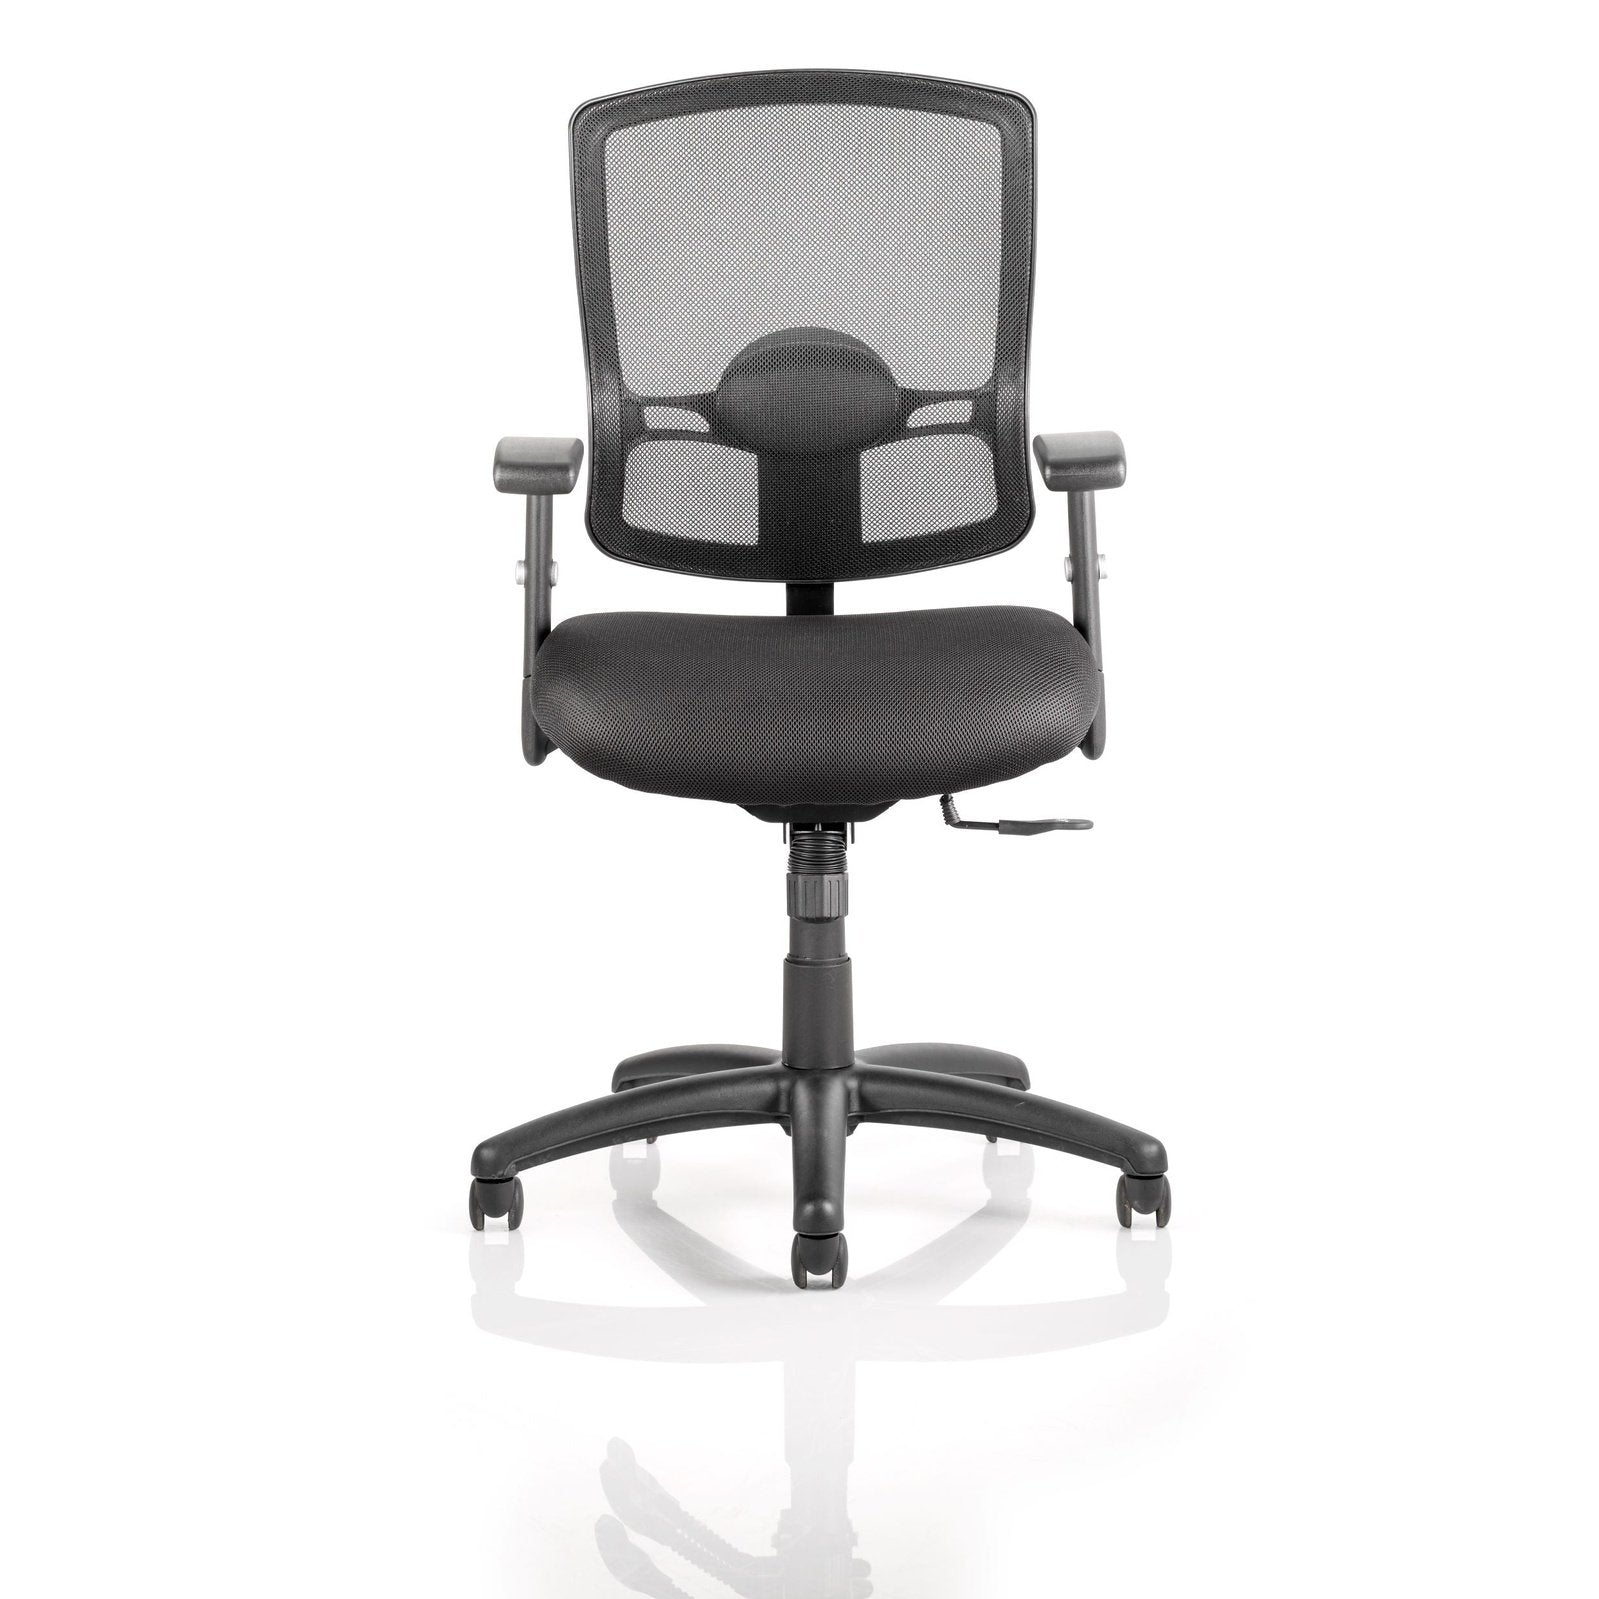 Portland Mesh Back Office Chair - Medium Task Operator Chair with Adjustable Arms, Lumbar Support & 125kg Capacity - Ideal for 8 Hour Daily Use